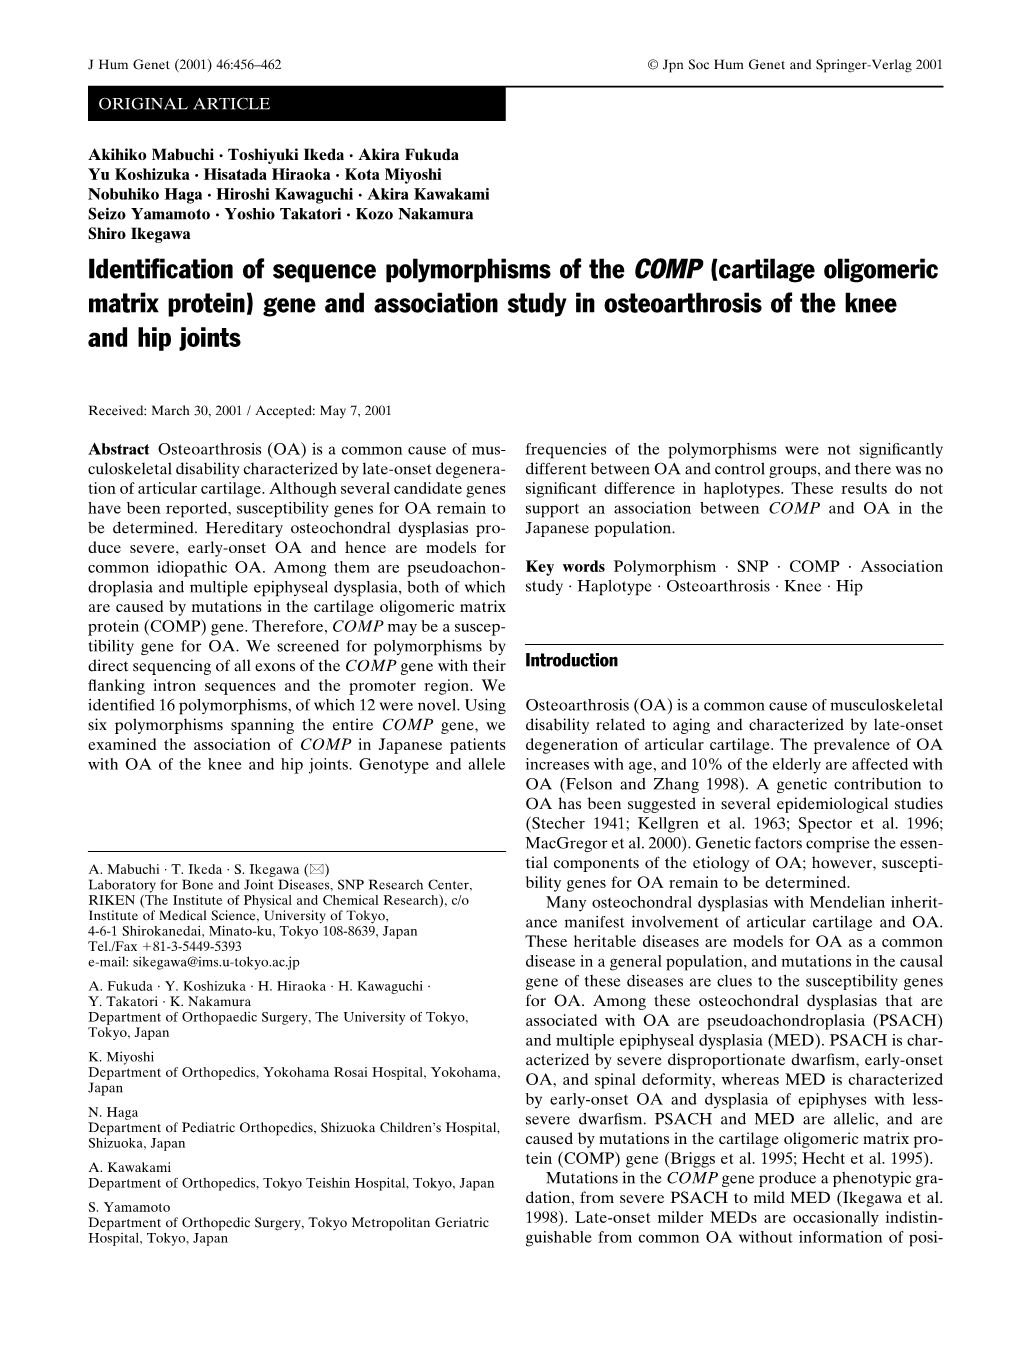 Cartilage Oligomeric Matrix Protein) Gene and Association Study in Osteoarthrosis of the Knee and Hip Joints